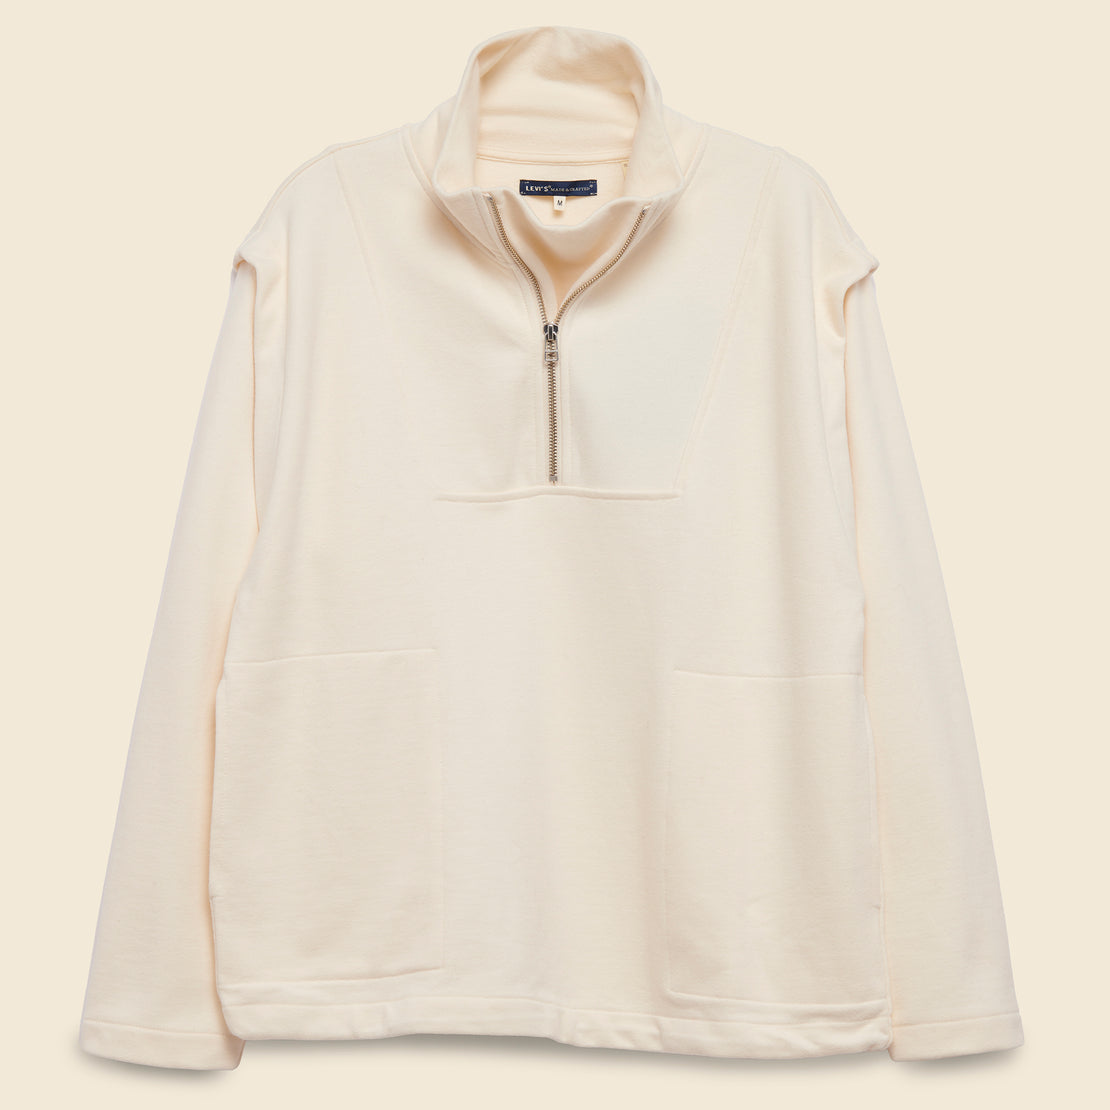 Levis Made & Crafted Fireside Fleece Pullover - Sunny Cream